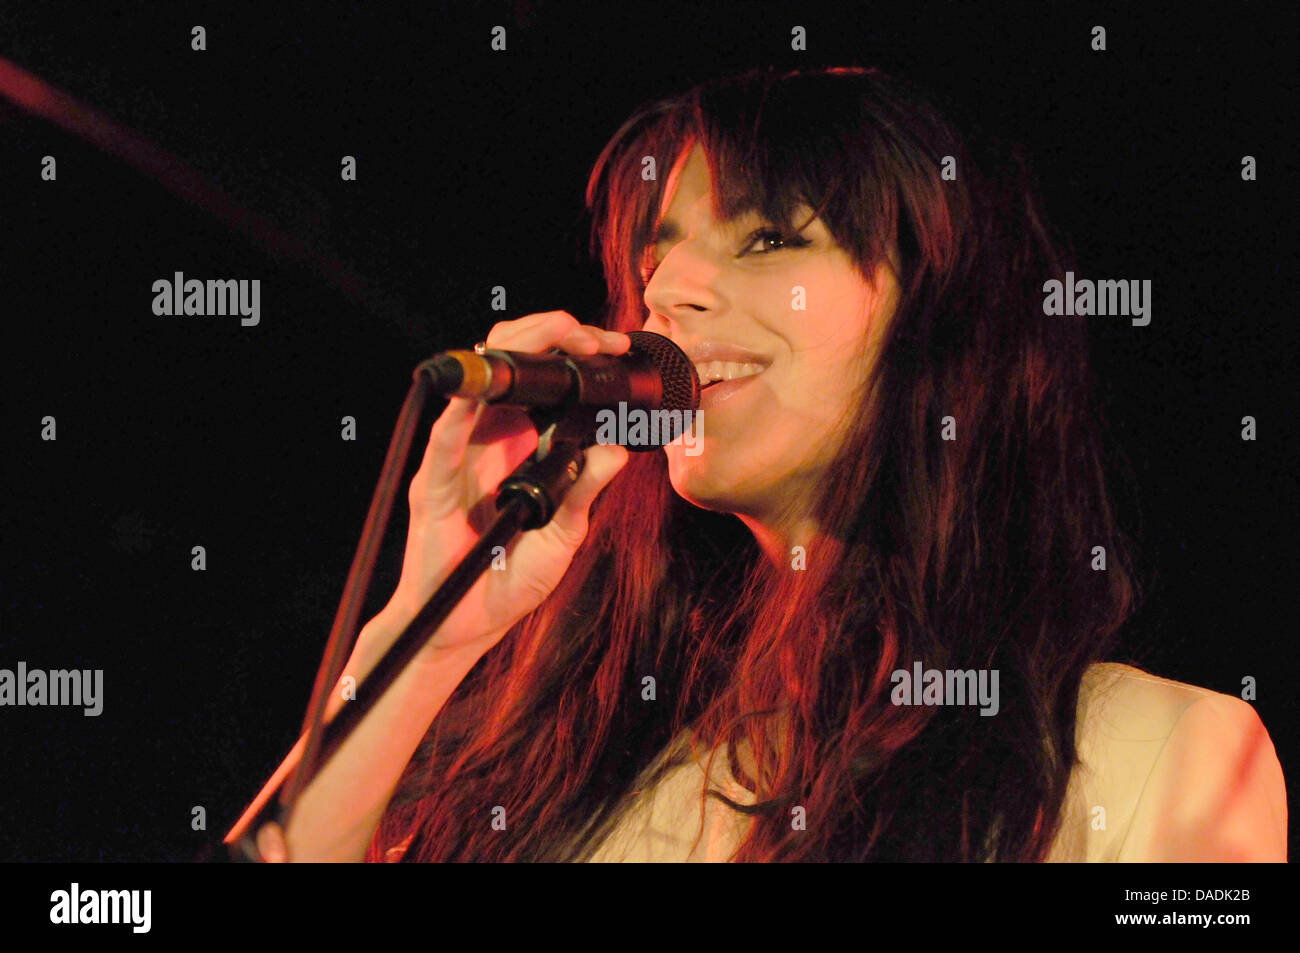 New Zealand singer Brooke Fraser is pictured during a concert in Cologne, Germany, 16 April 2011. Photo: Jan Knoff Stock Photo